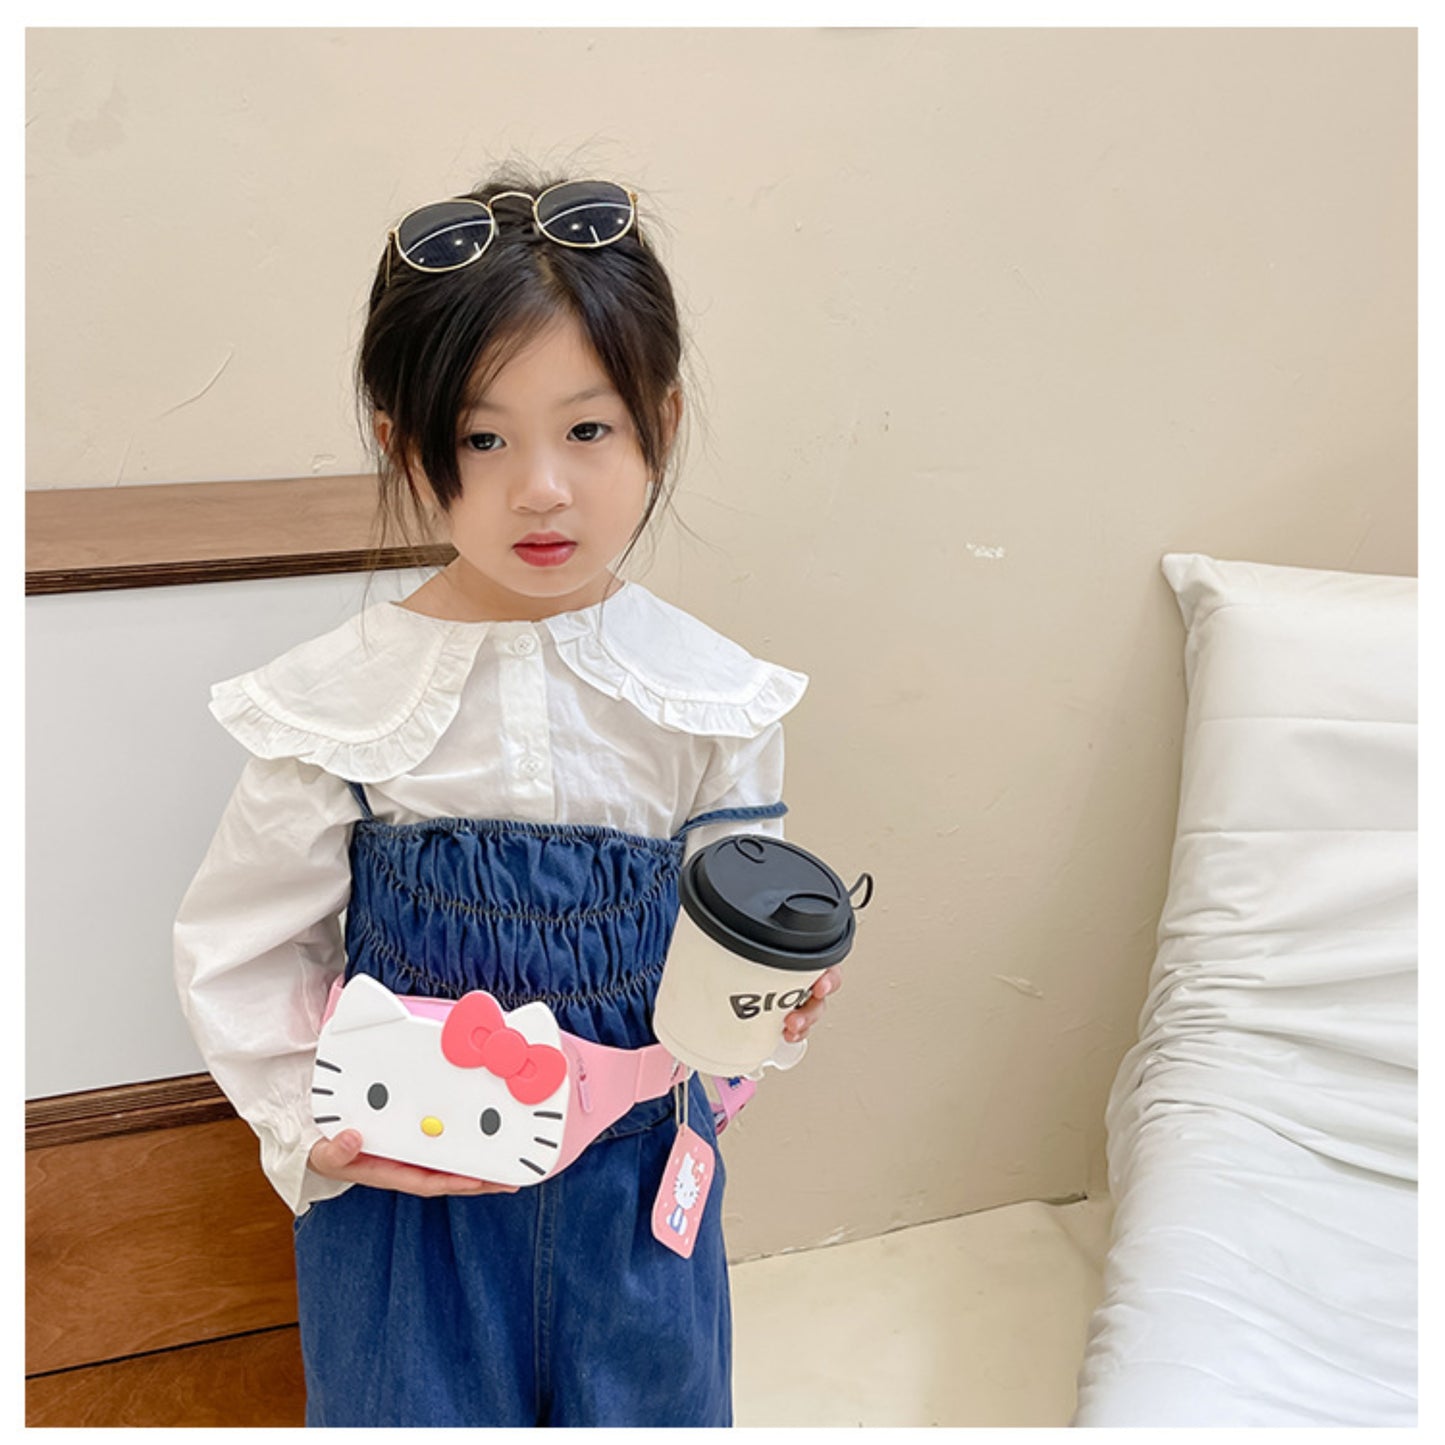 Hello Kitty Cartoon Anime Waterproof Fanny Pack for Kids - Cute and Stylish Mini Waist Bag with Adjustable Belt and Multiple Functions